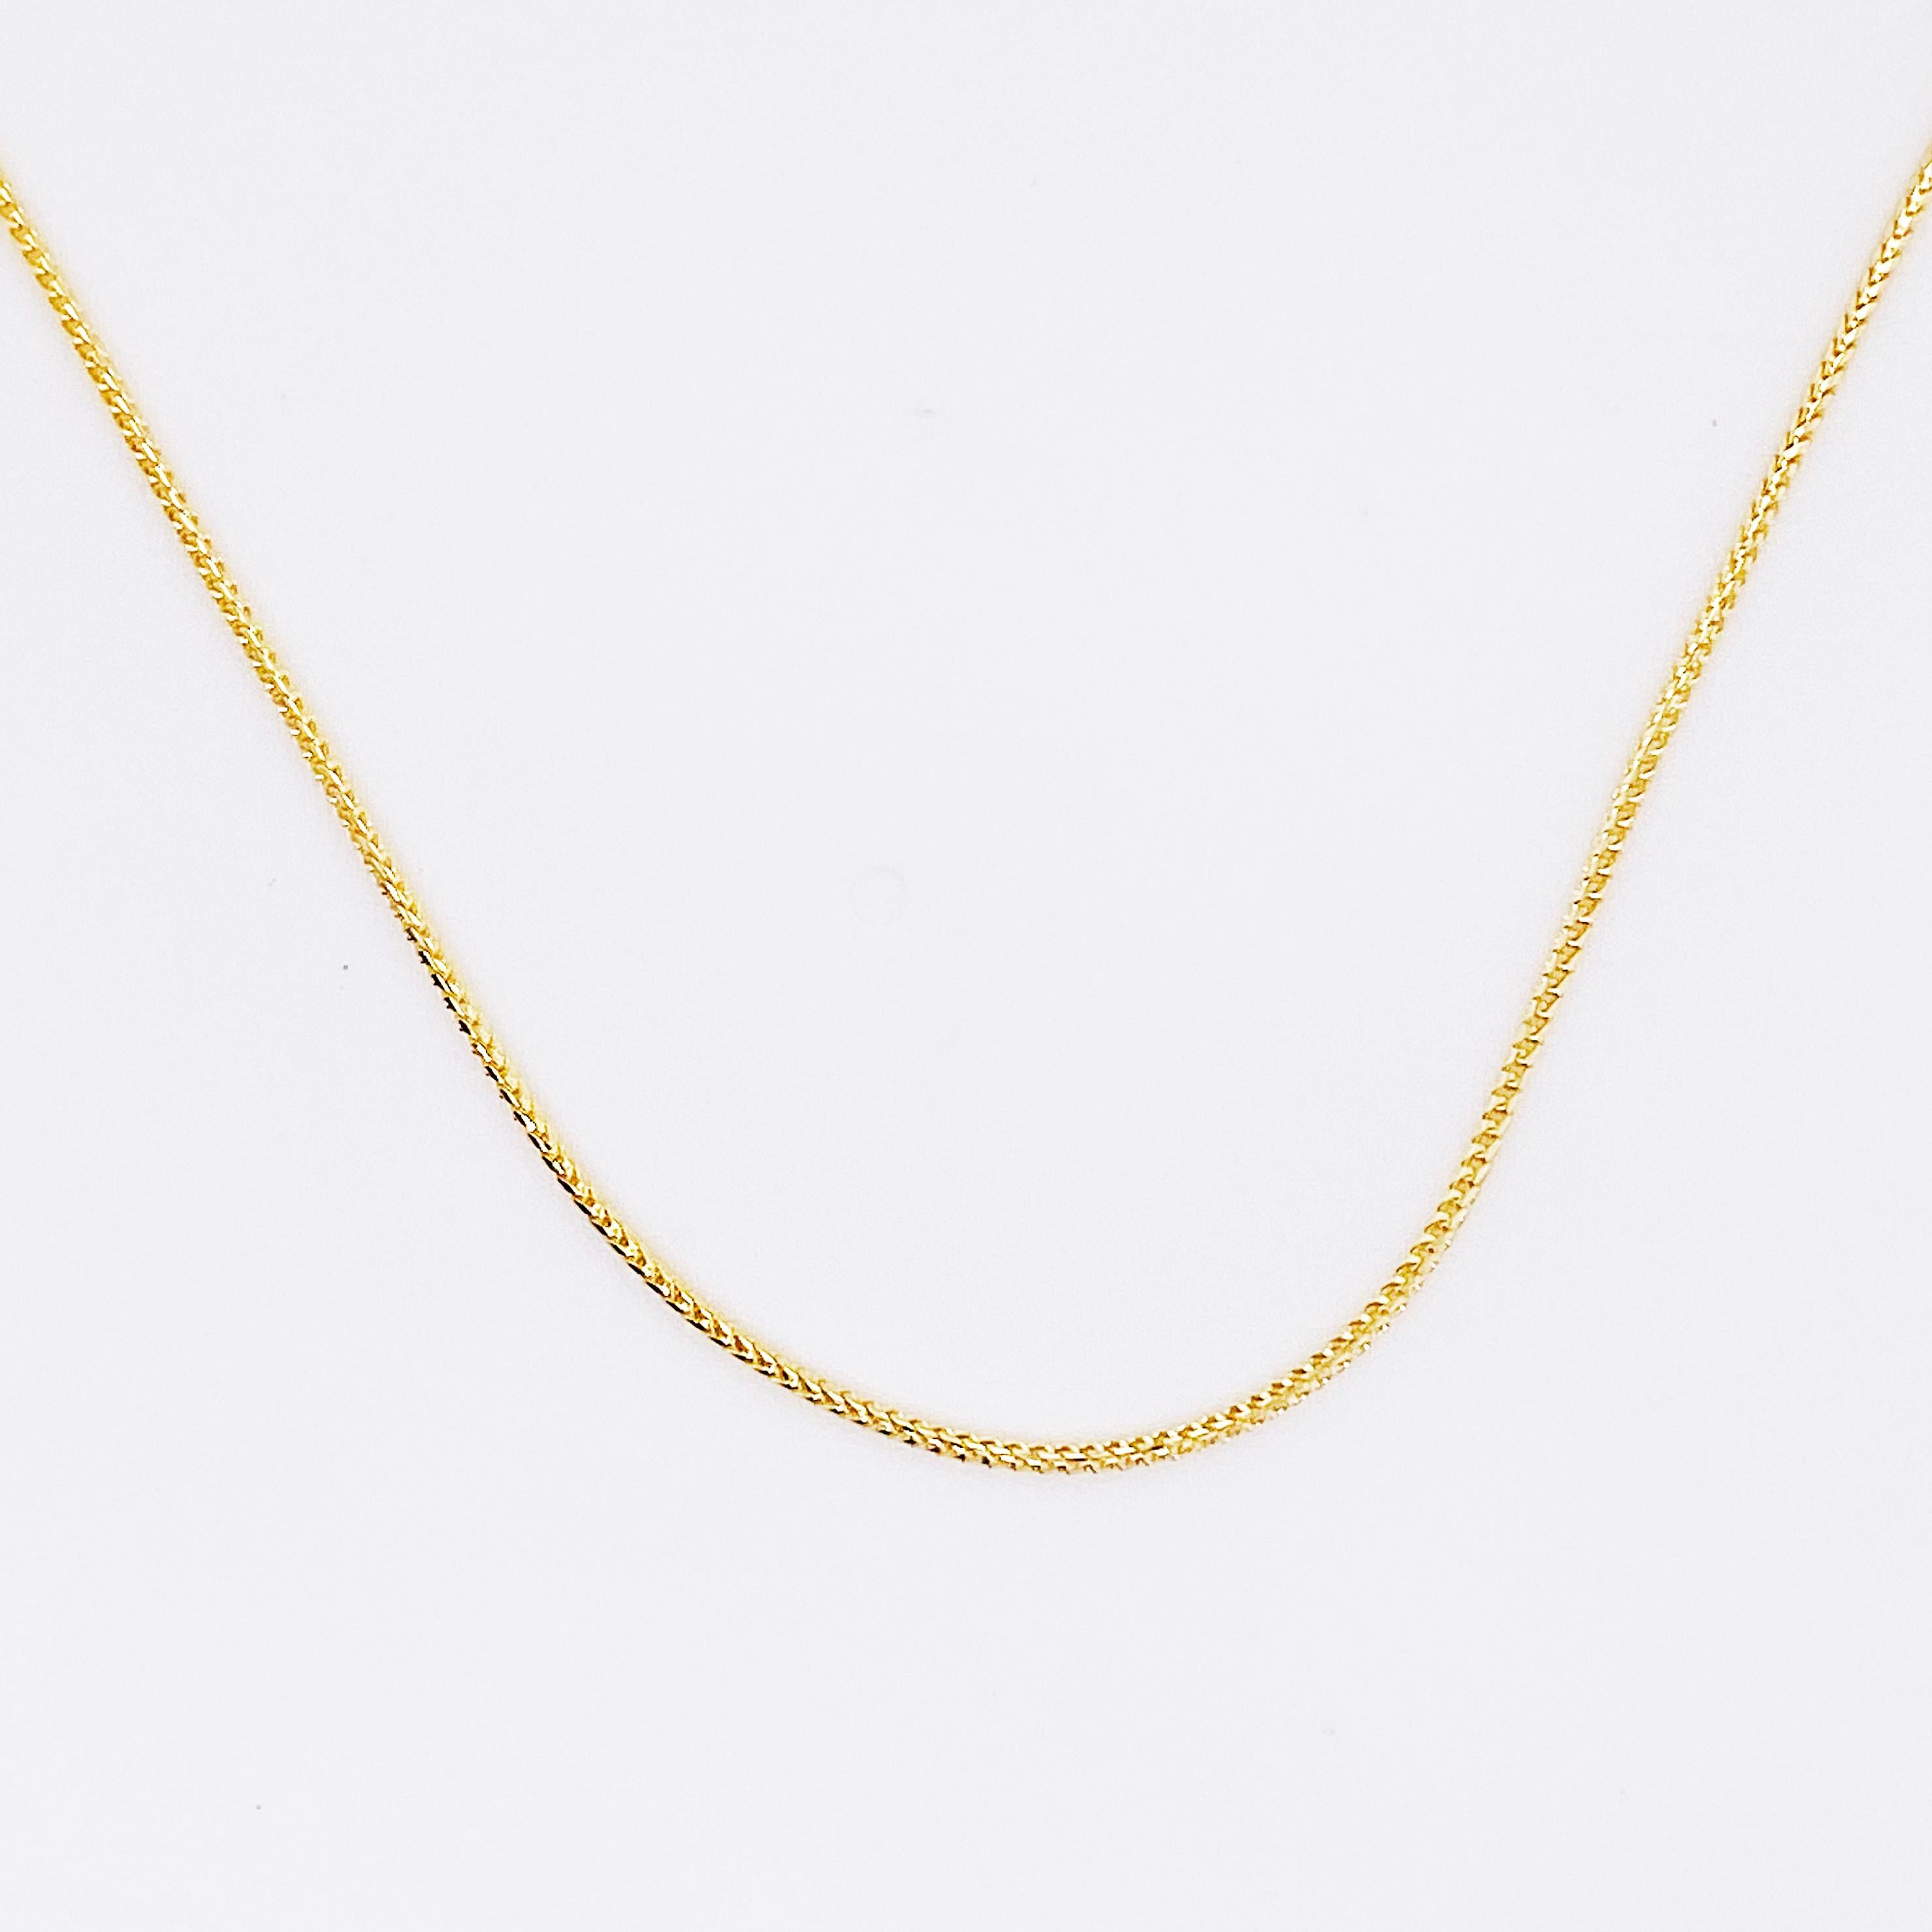 ADJUSTABLE 14 KARAT YELLOW GOLD FRANCO CHAIN up to 22 inches
Metal Quality: 14K Yellow Gold
Chain Type: Franco
Chain Length: 22 Inch
Clasp: Lobster with Adjustable Bolo Clasp
Chain Diameter: 1.0 Millimeters
Gold Weight: 3.6 Grams